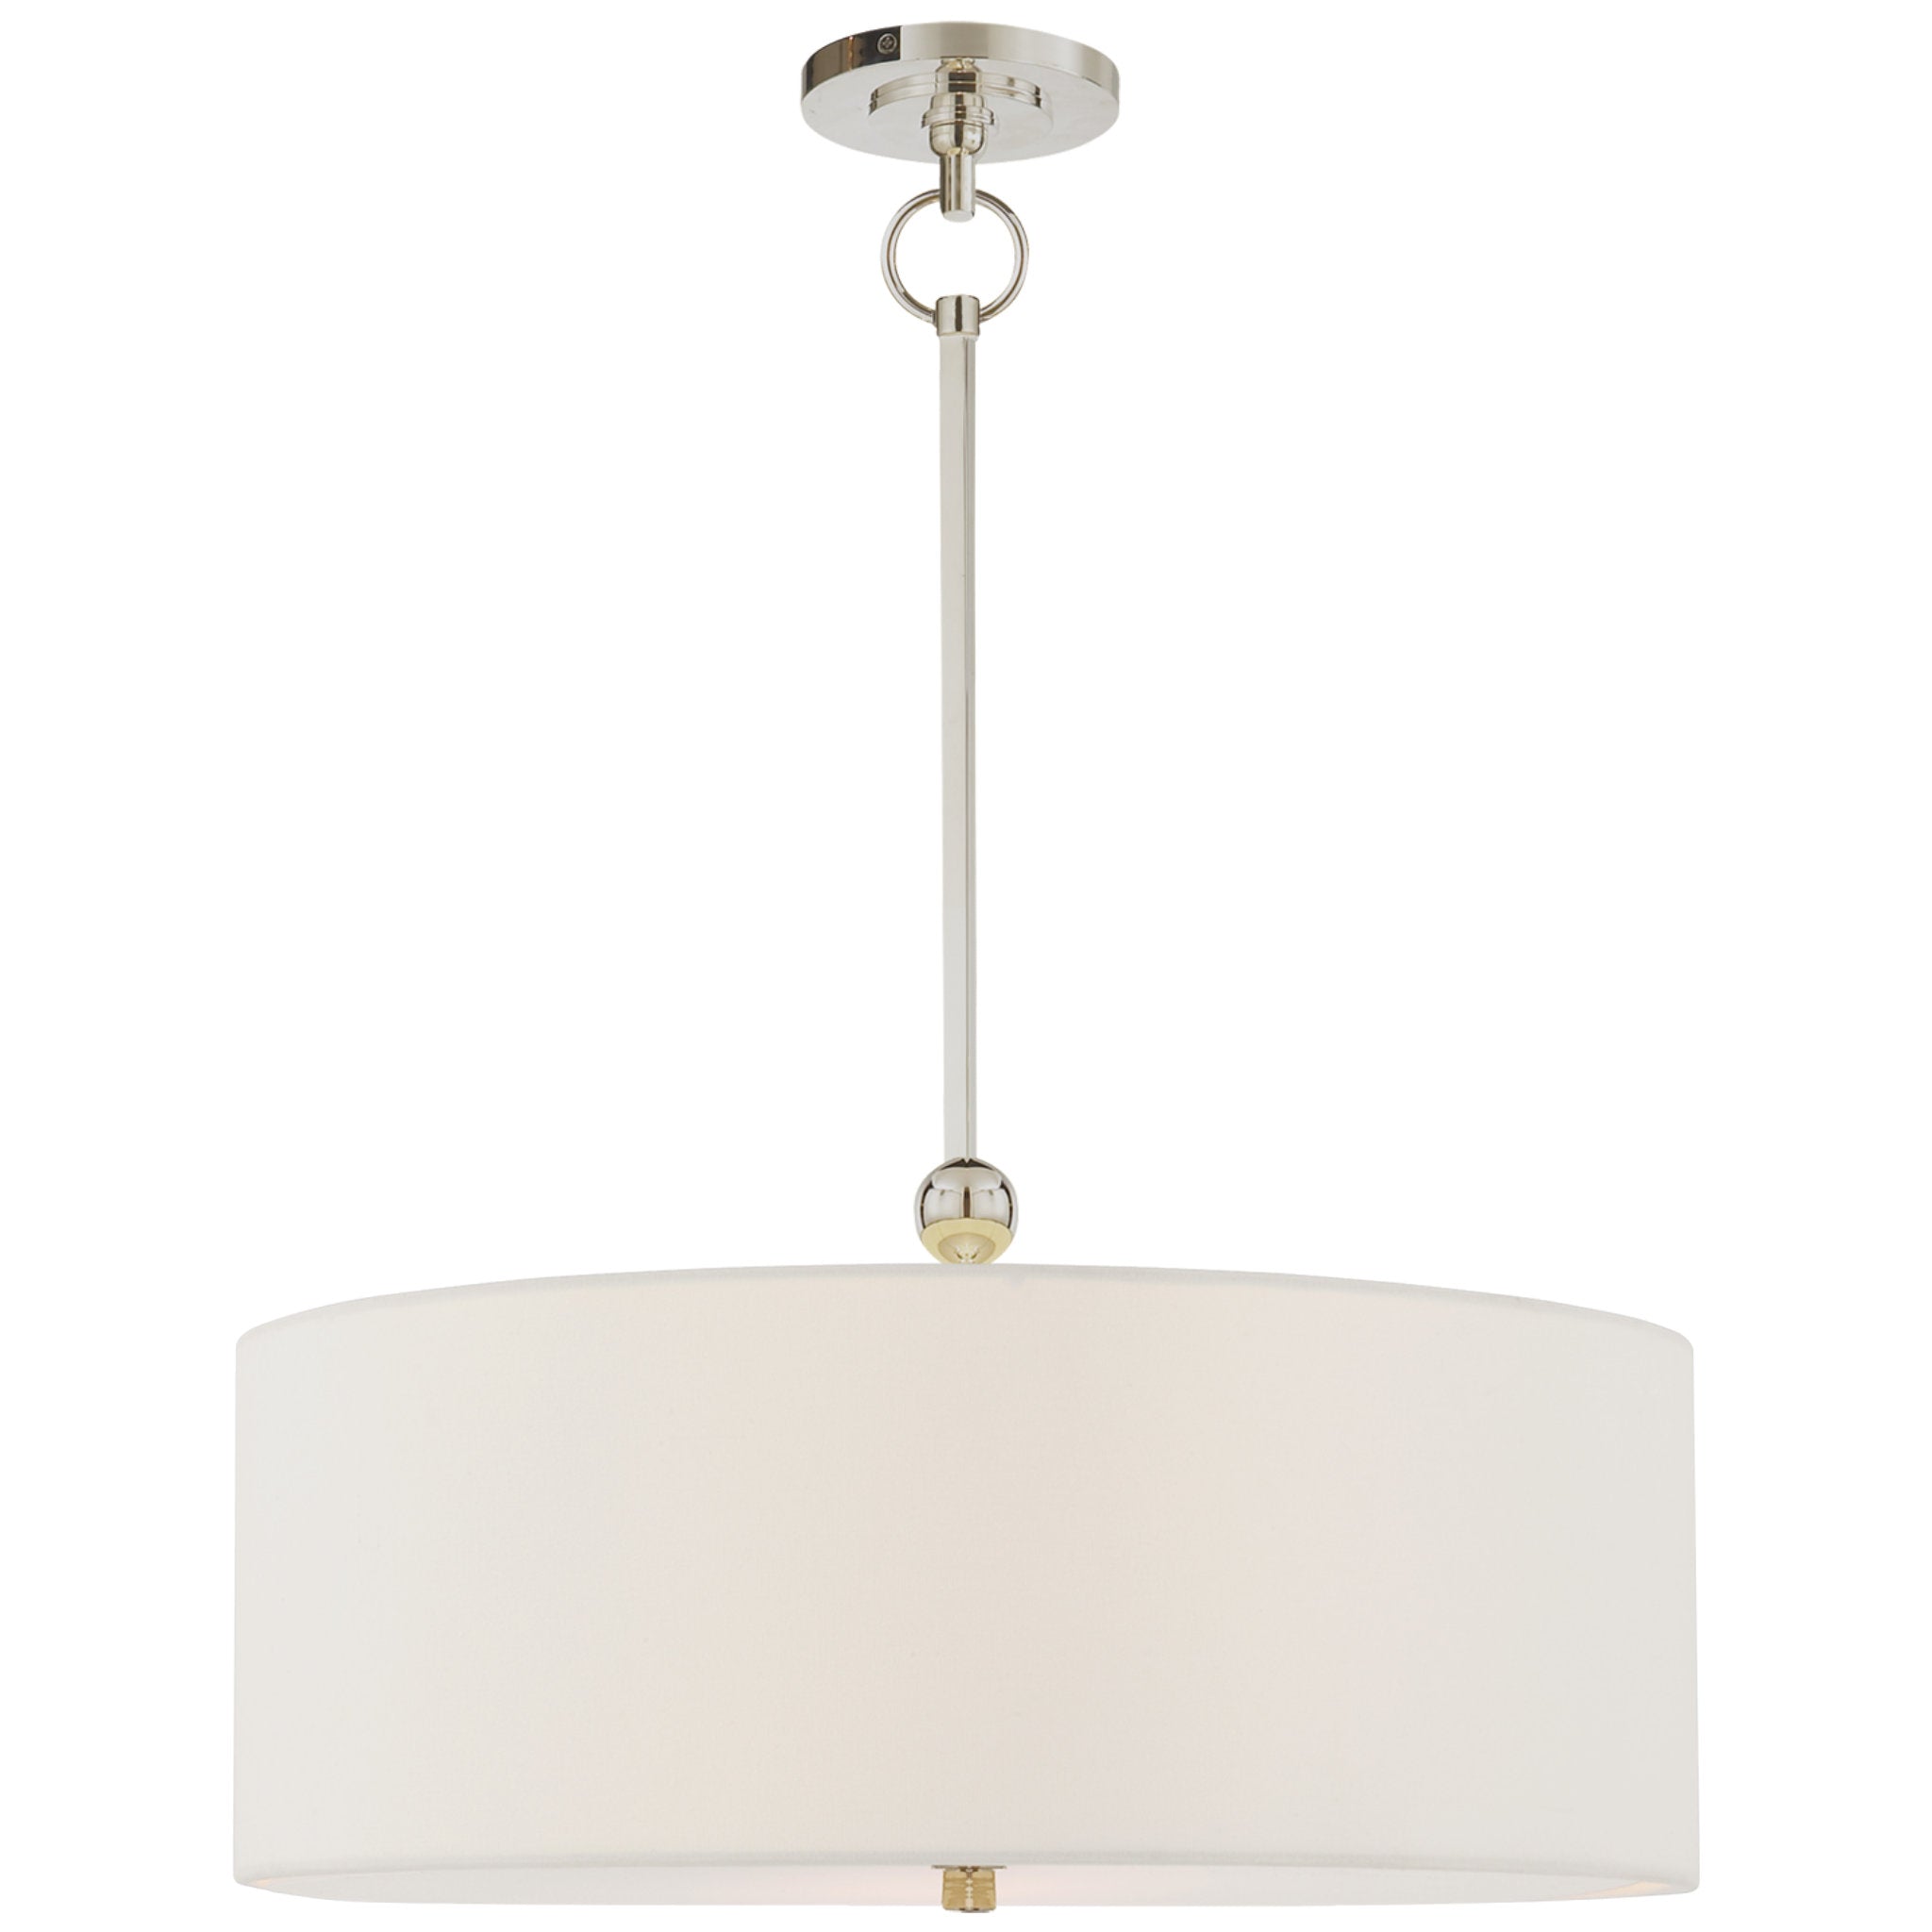 Thomas O'Brien Reed Hanging Shade in Polished Nickel with Linen Shade